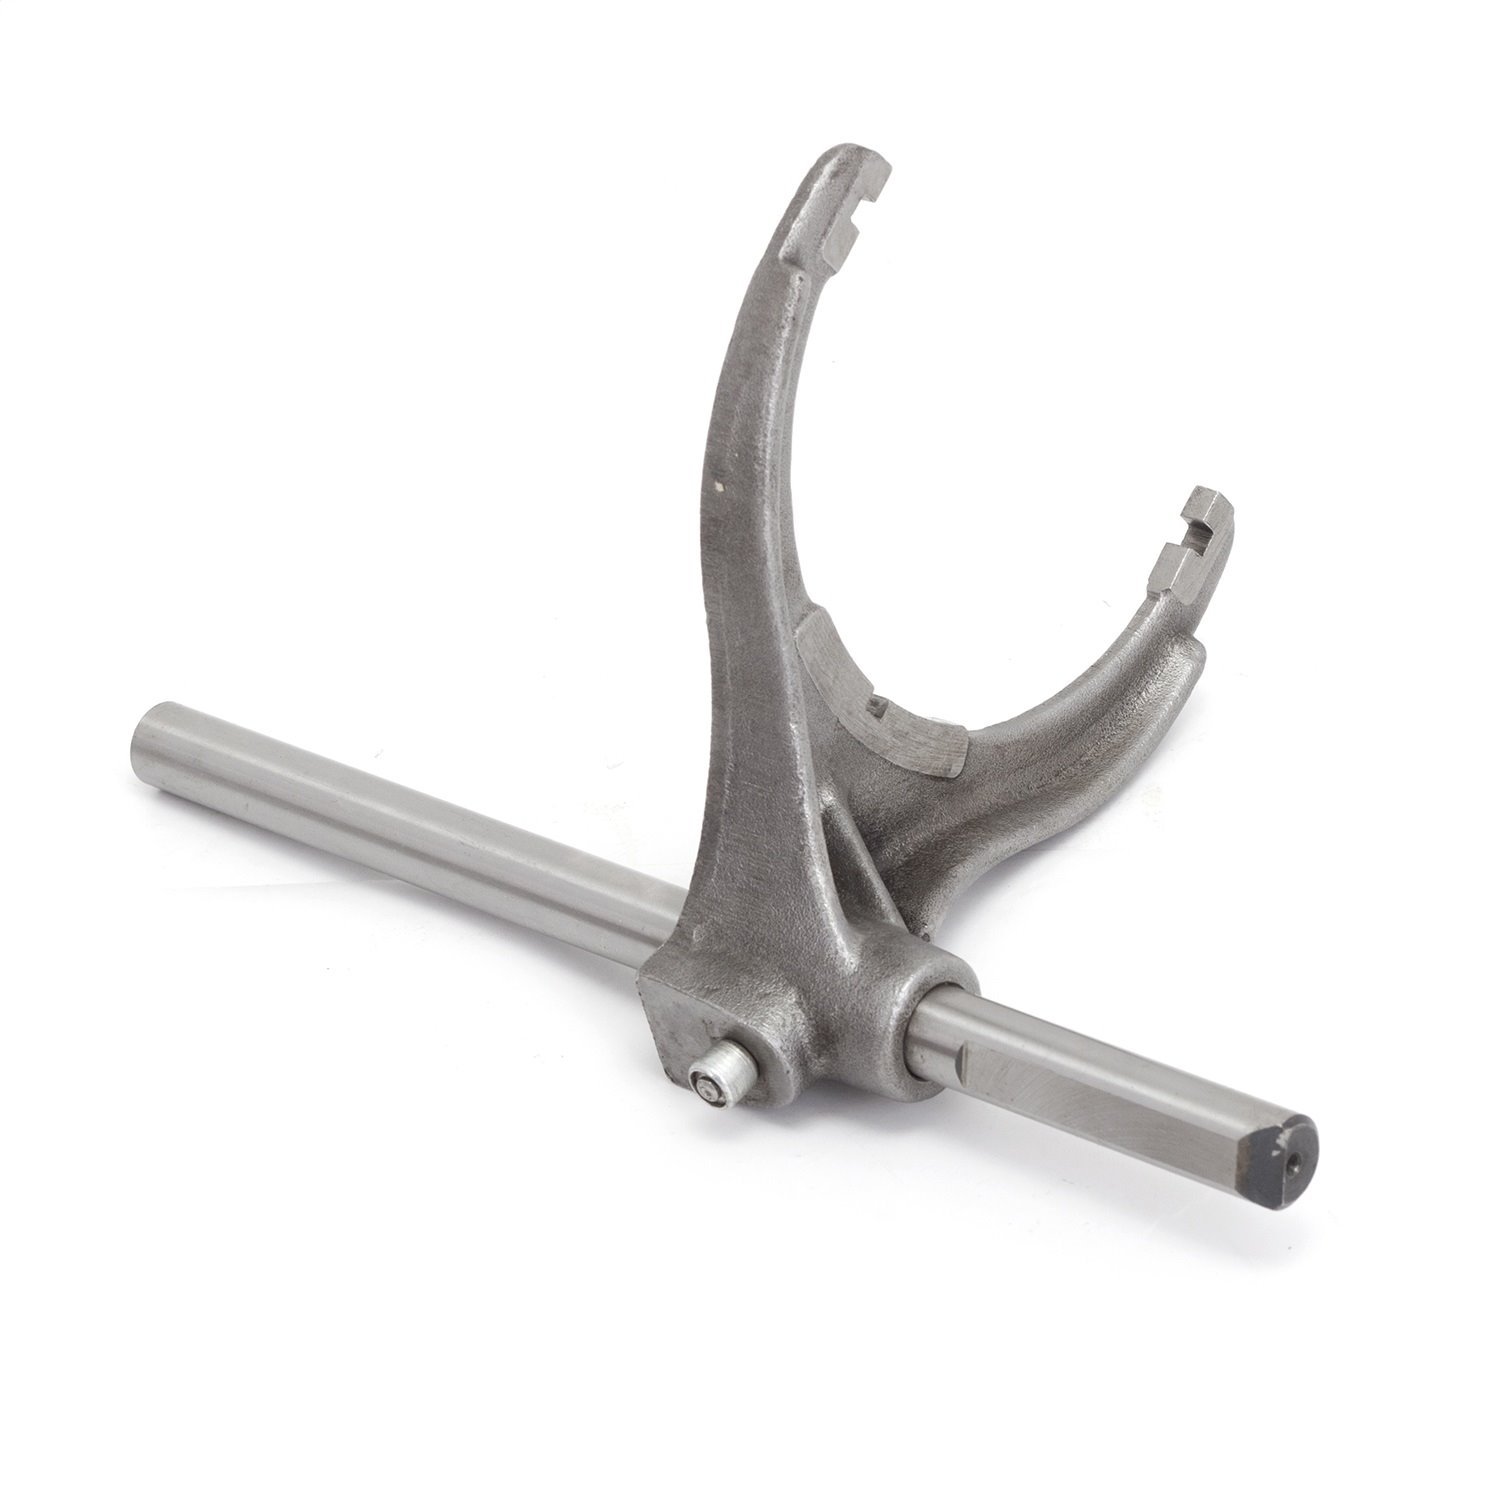 This NP-231 transfer case shift fork from Omix-ADA fits 88-96 Cherokees and 88-95 Wranglers.